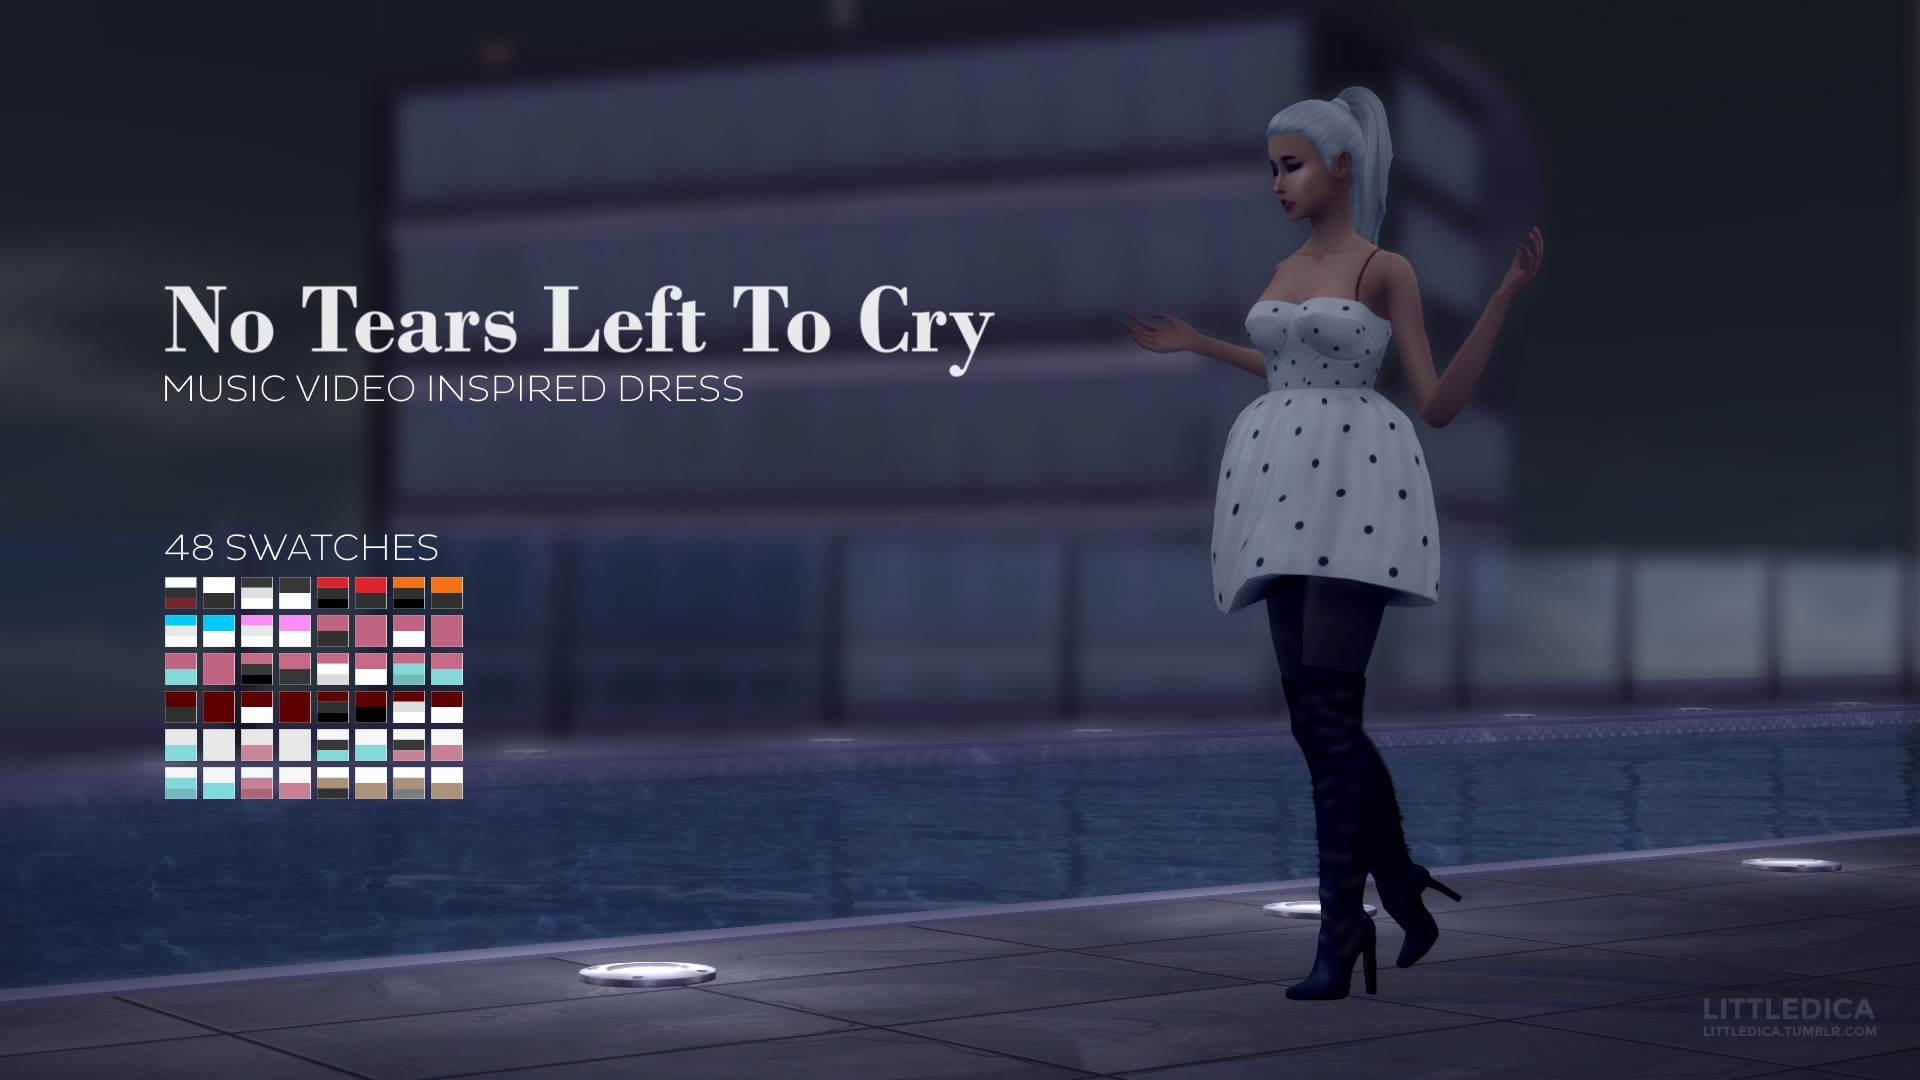 Mod The Sims - Ariana Grande's No Tears Left To Cry Outfit Inspired Dress